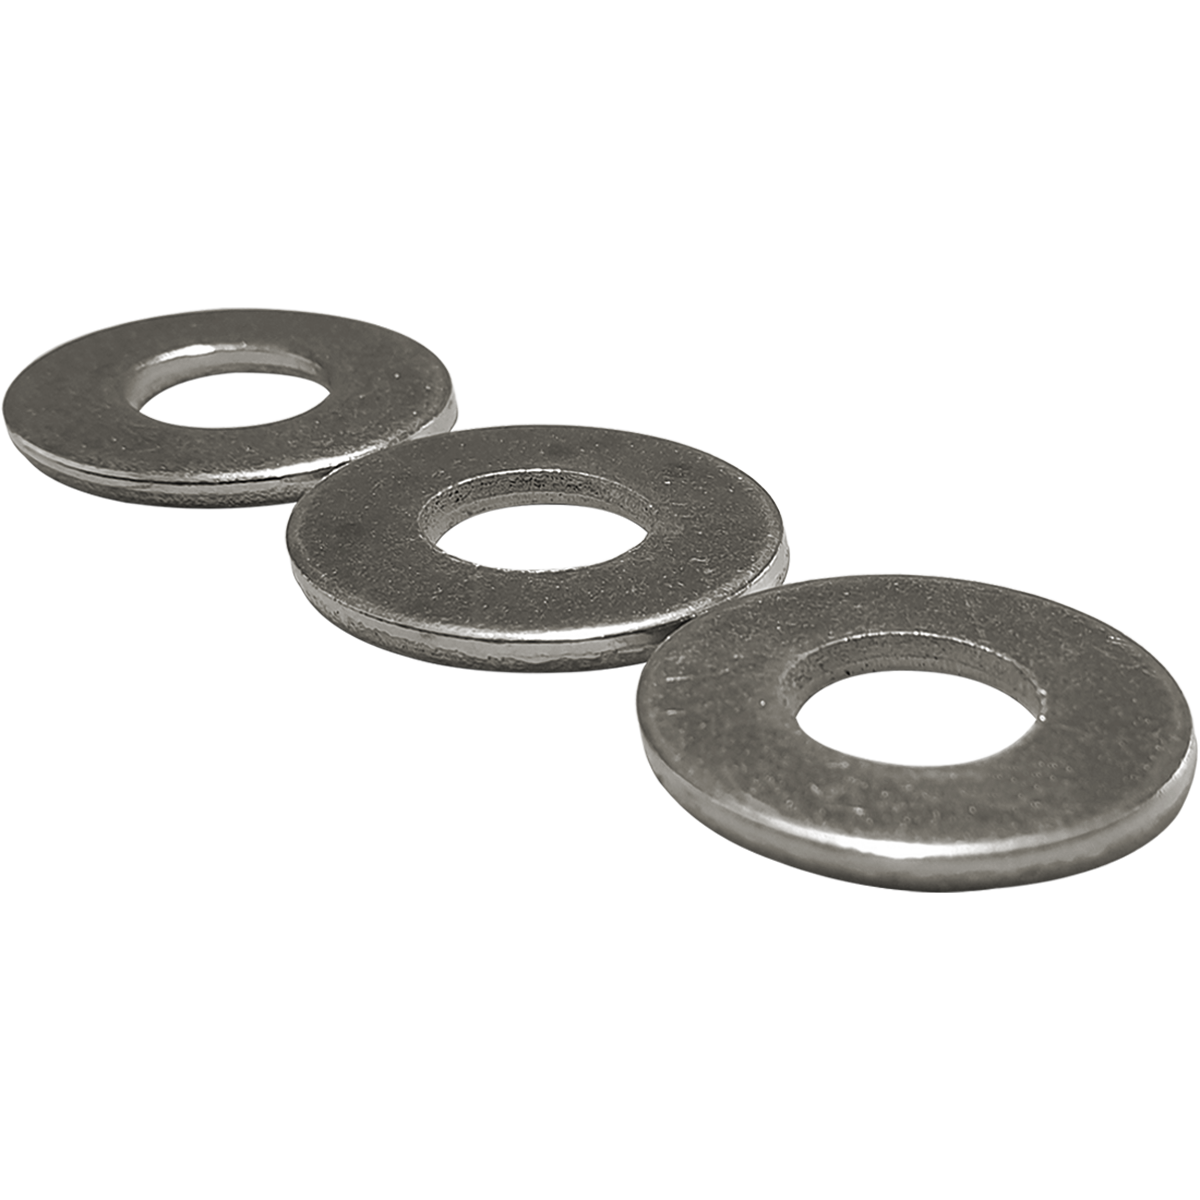 'Form C’ flat washers are another common washer. Available in various sizes and are competitively priced